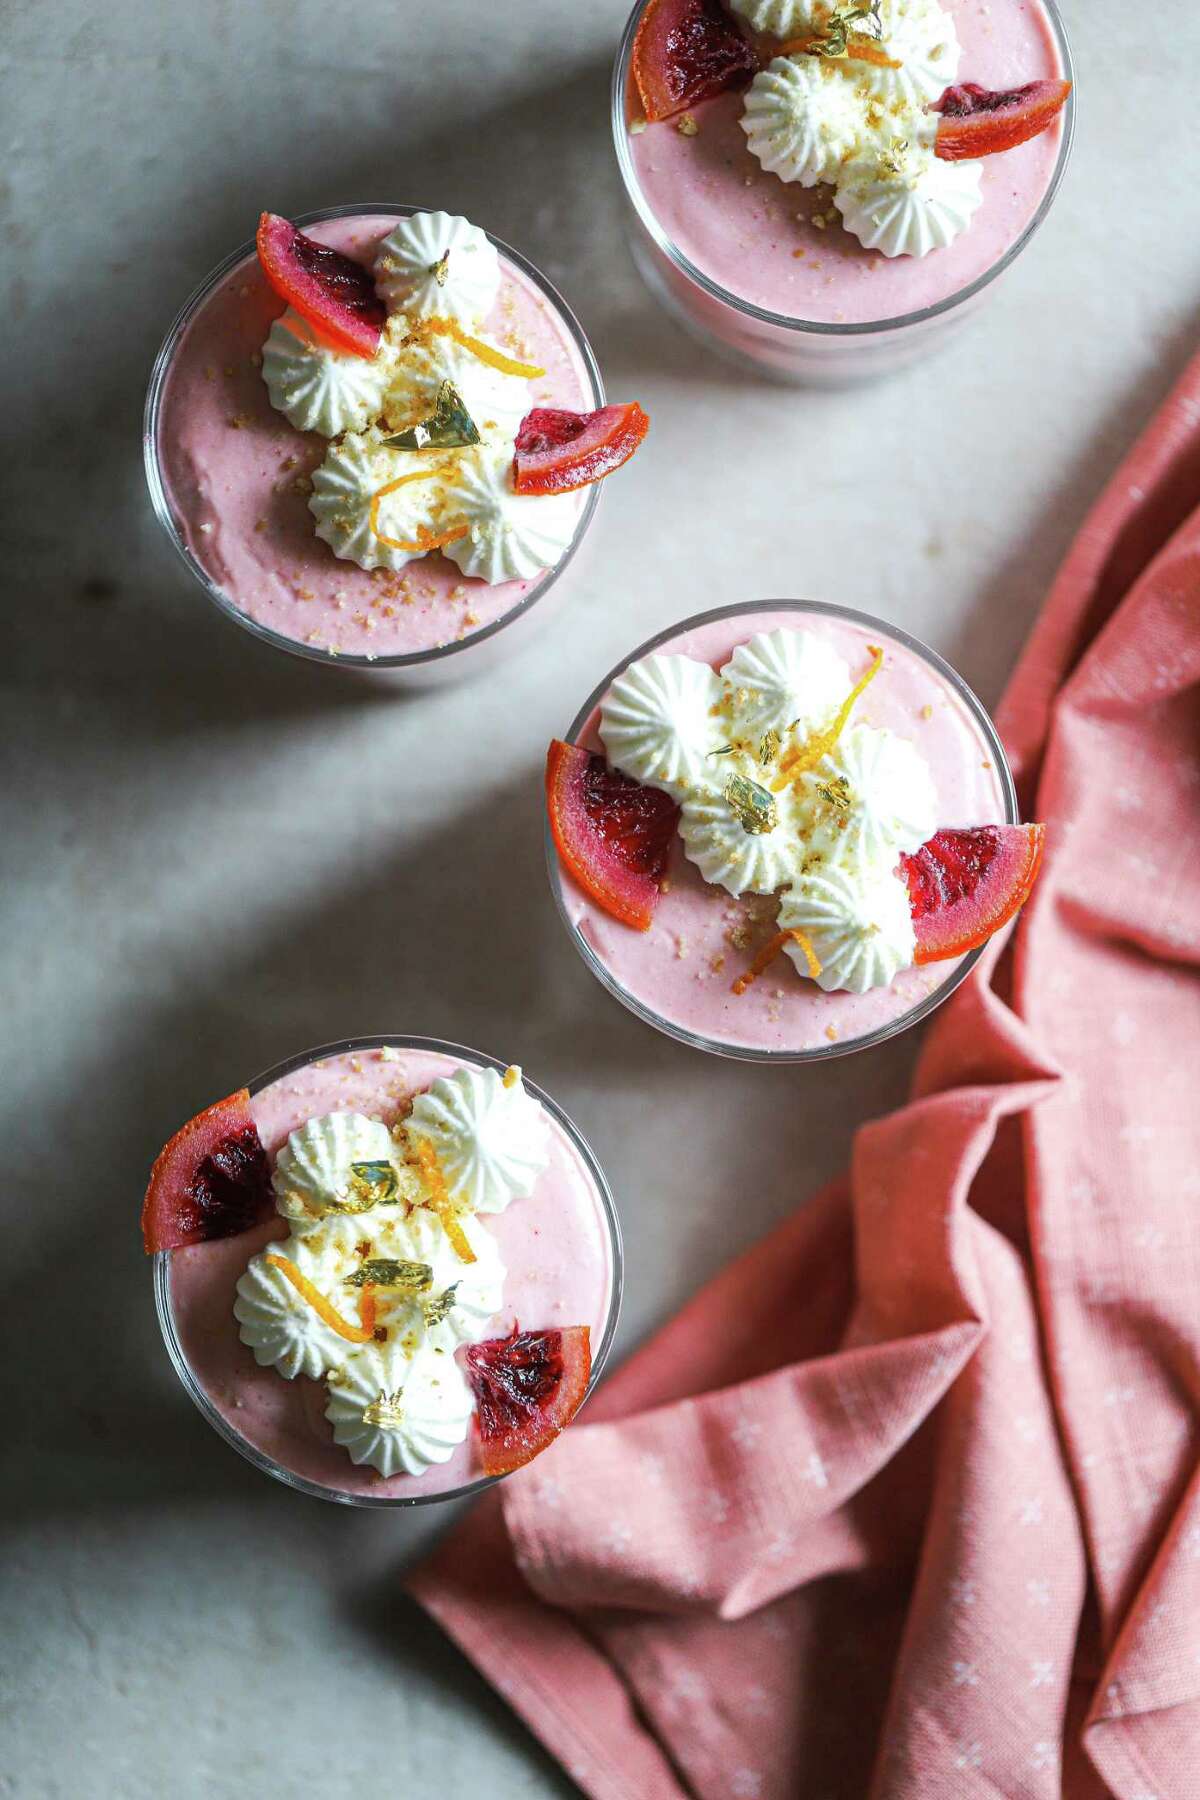 Piped whipped cream, dried slices of blood orange and zest make an attractive finish.